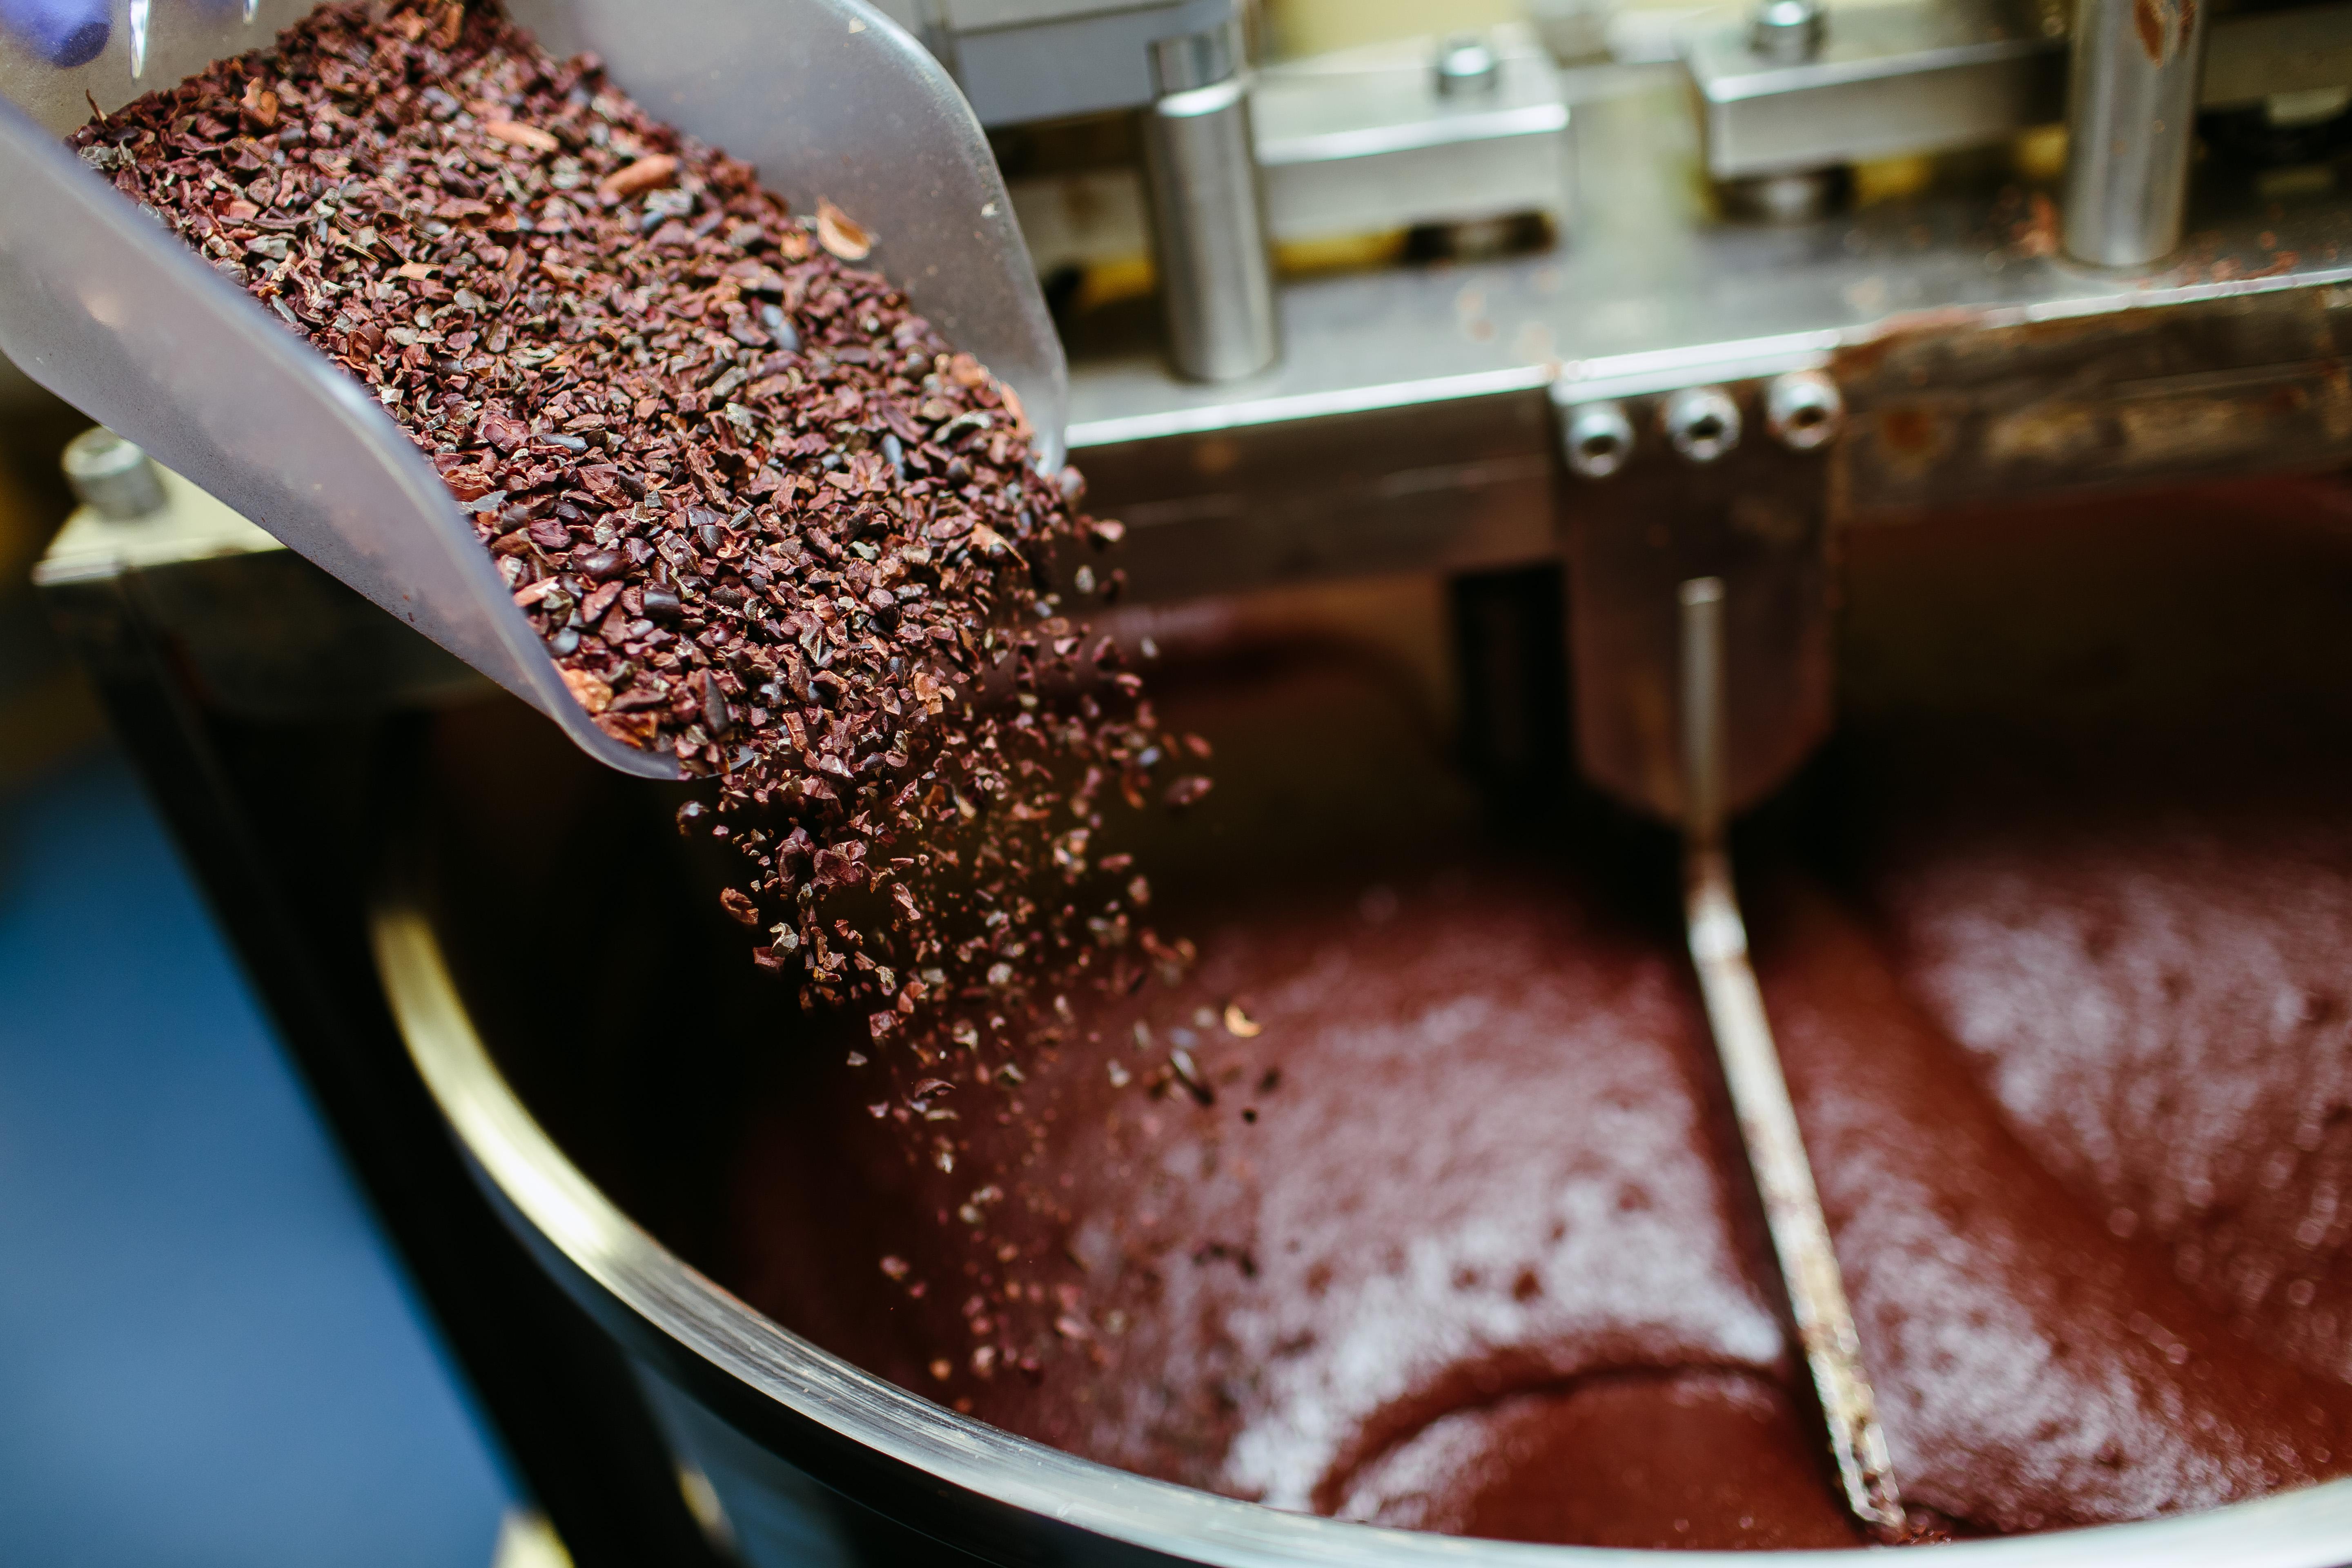 Cocoa grits being poured into a grinder full of chocolate.